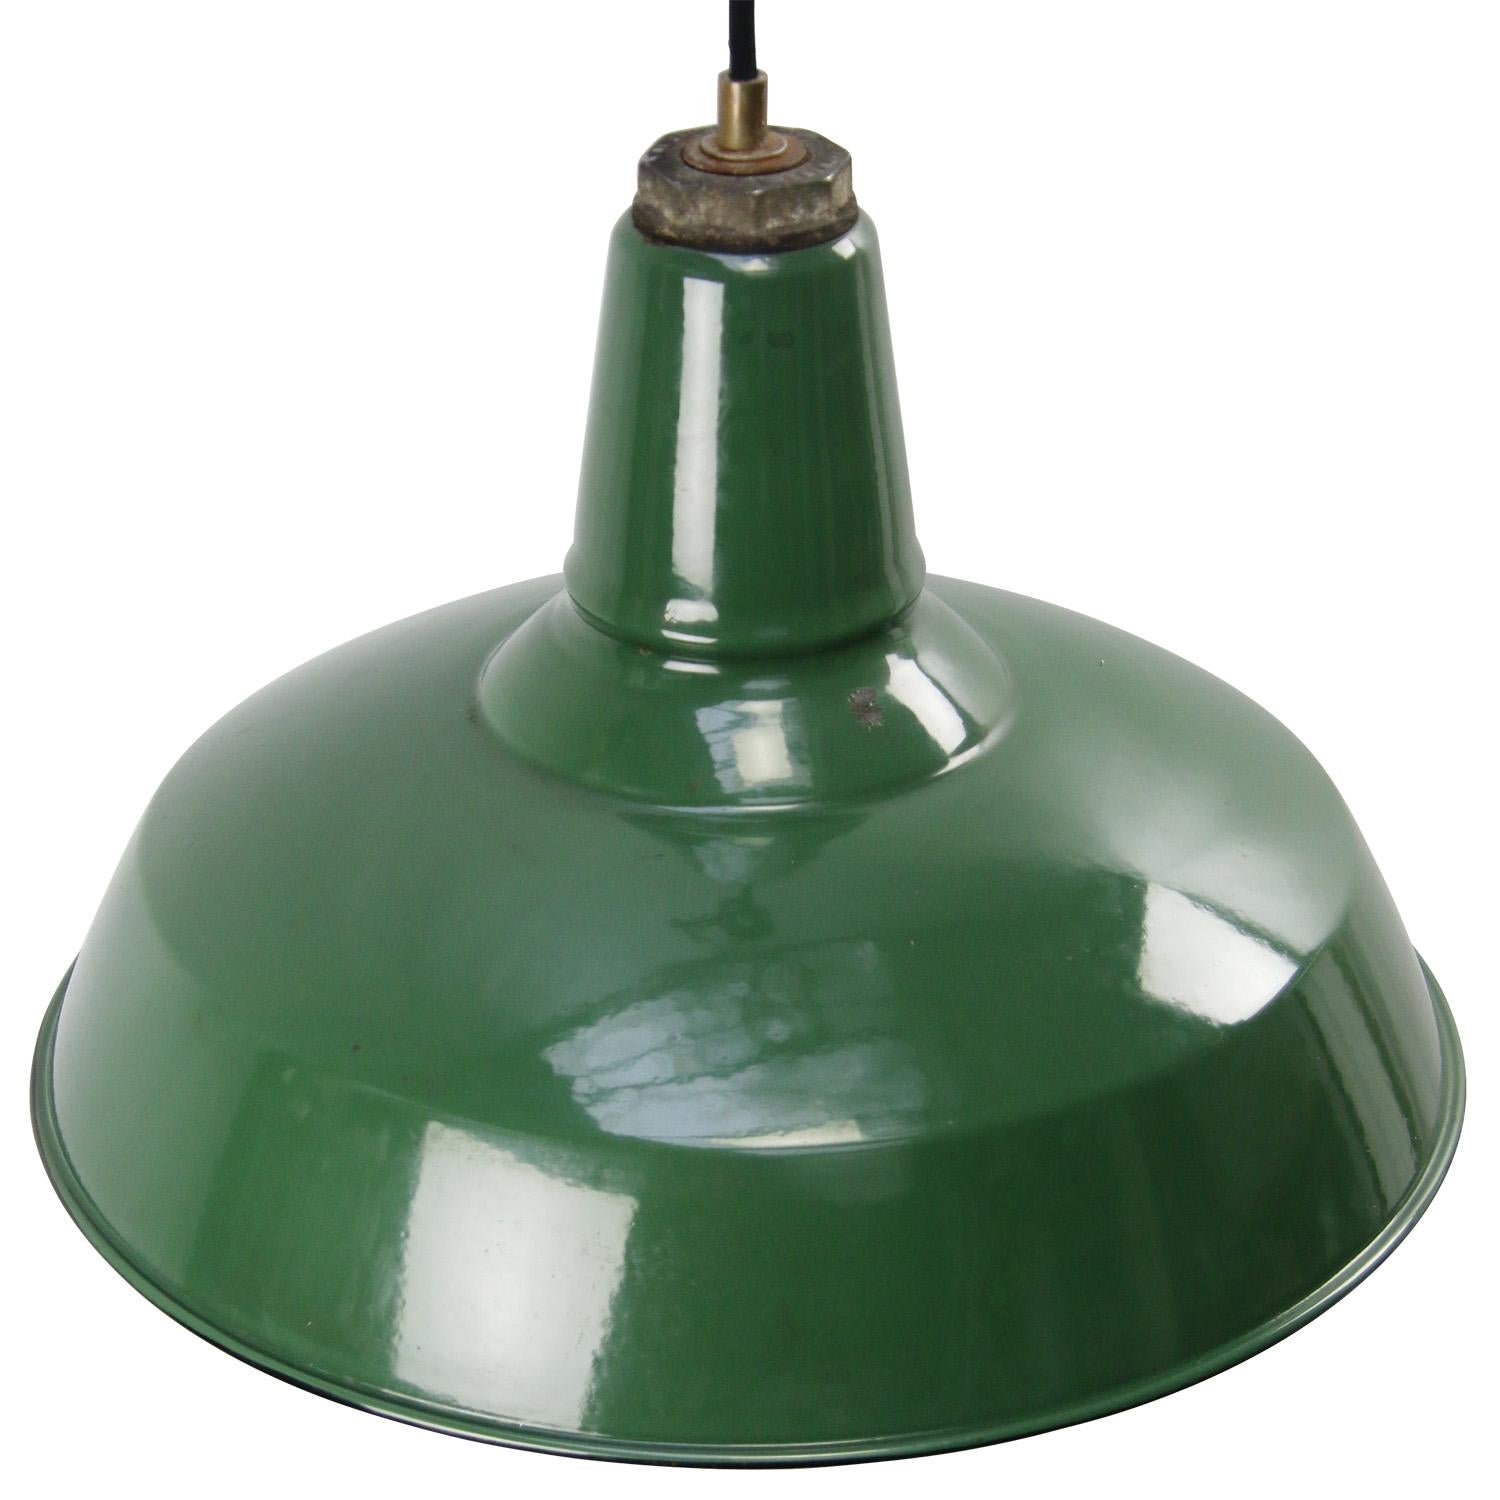 American industrial factory pendant light by Benjamin USA.
Green enamel white interior.
Metal top.

Weight: 1.90 kg / 4.2 lb.

Priced per individual item. All lamps have been made suitable by international standards for incandescent light